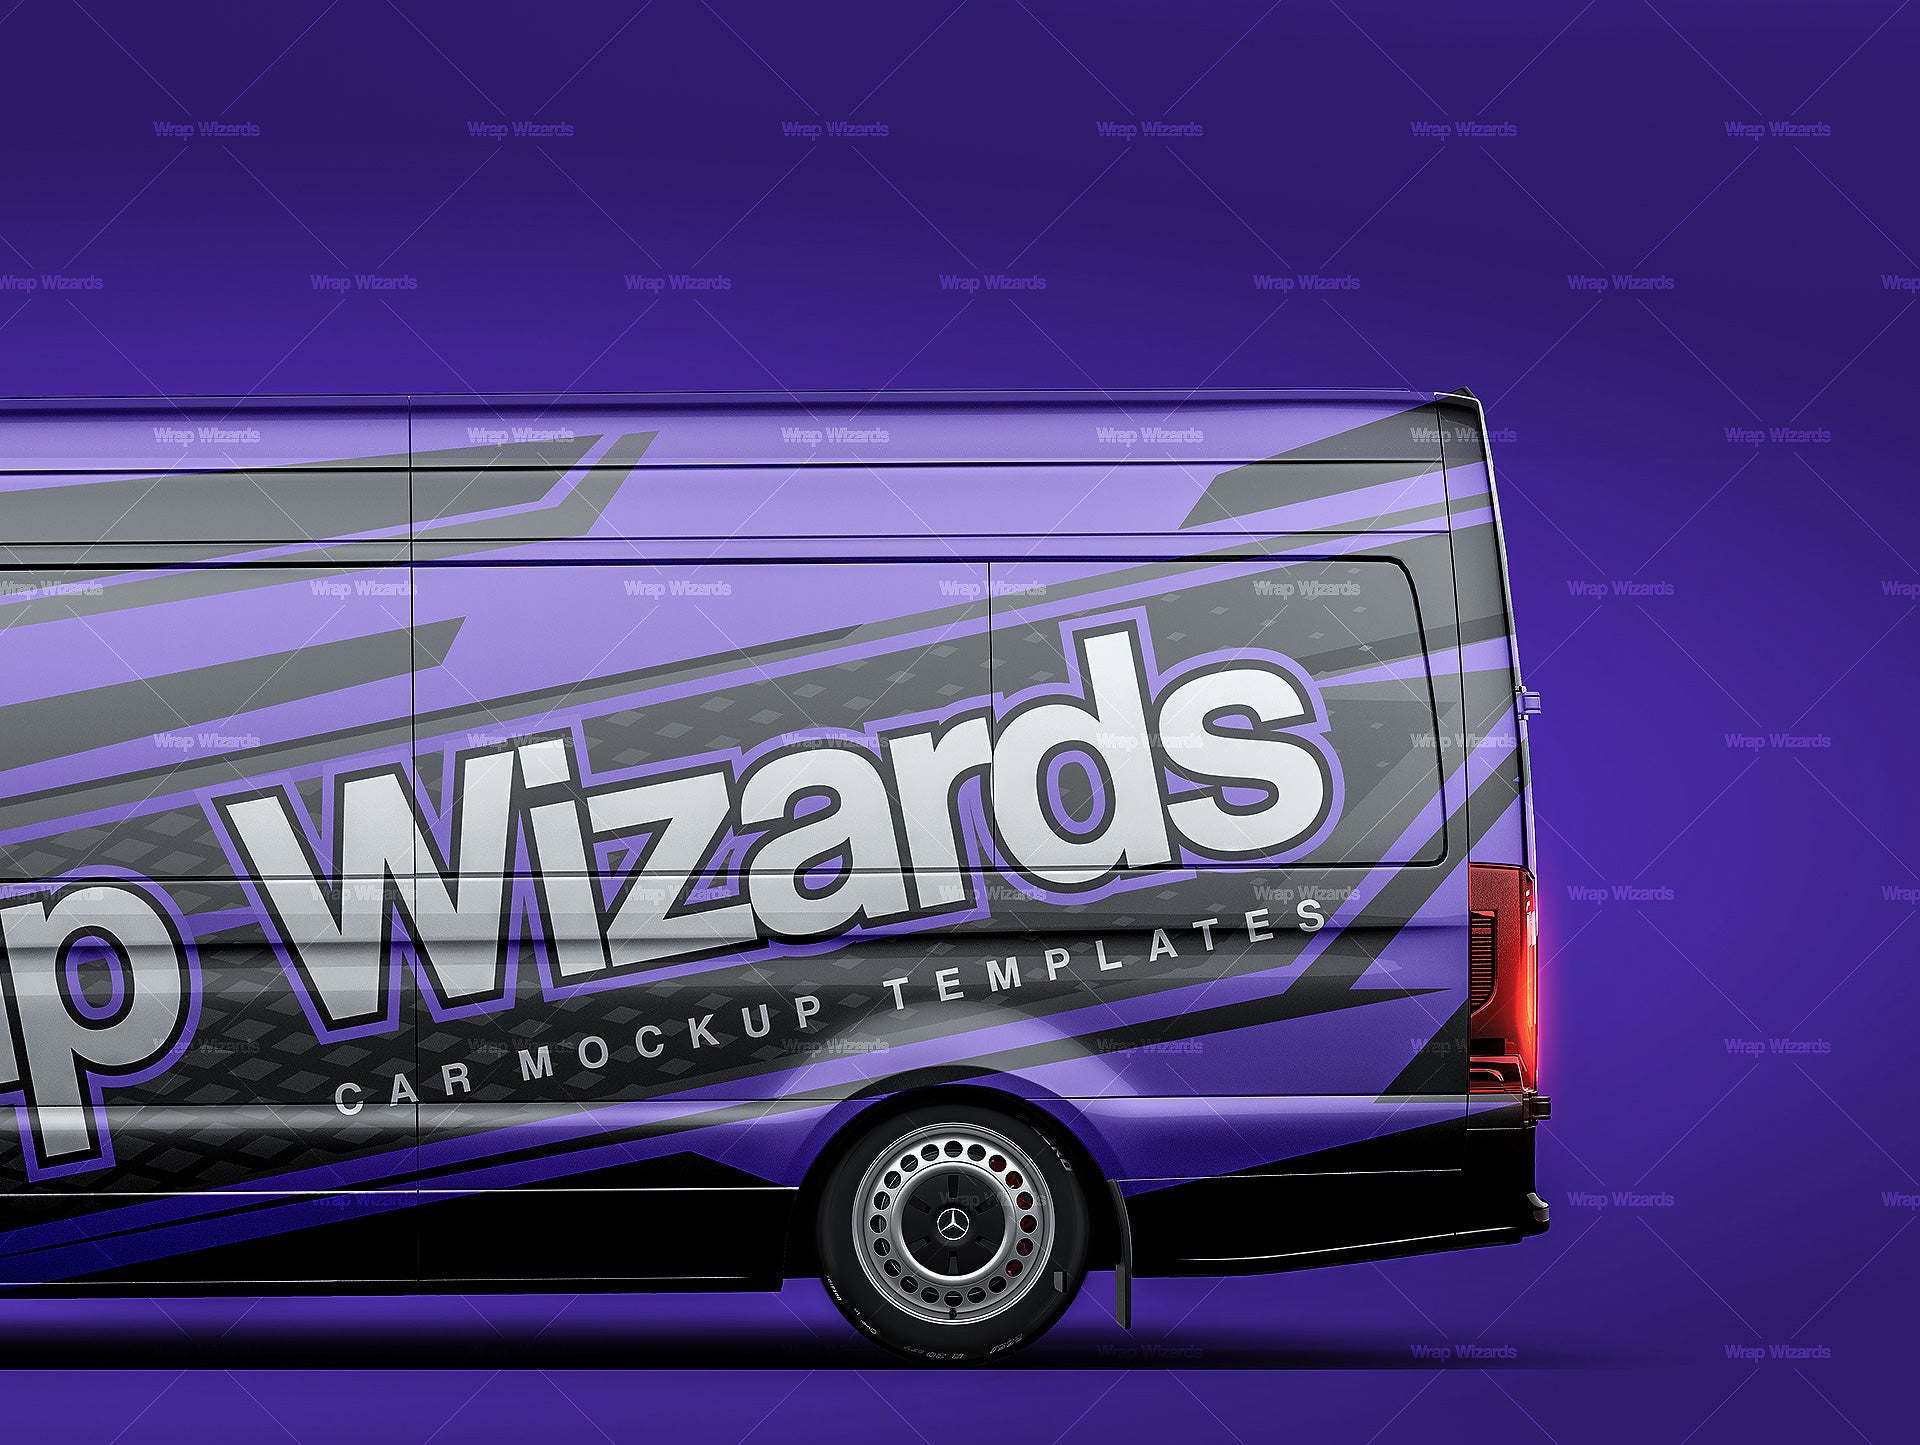 Mercedes Benz Sprinter panel/passenger van L3H2 with optional windows glossy finish - all sides Car Mockup Template.psd